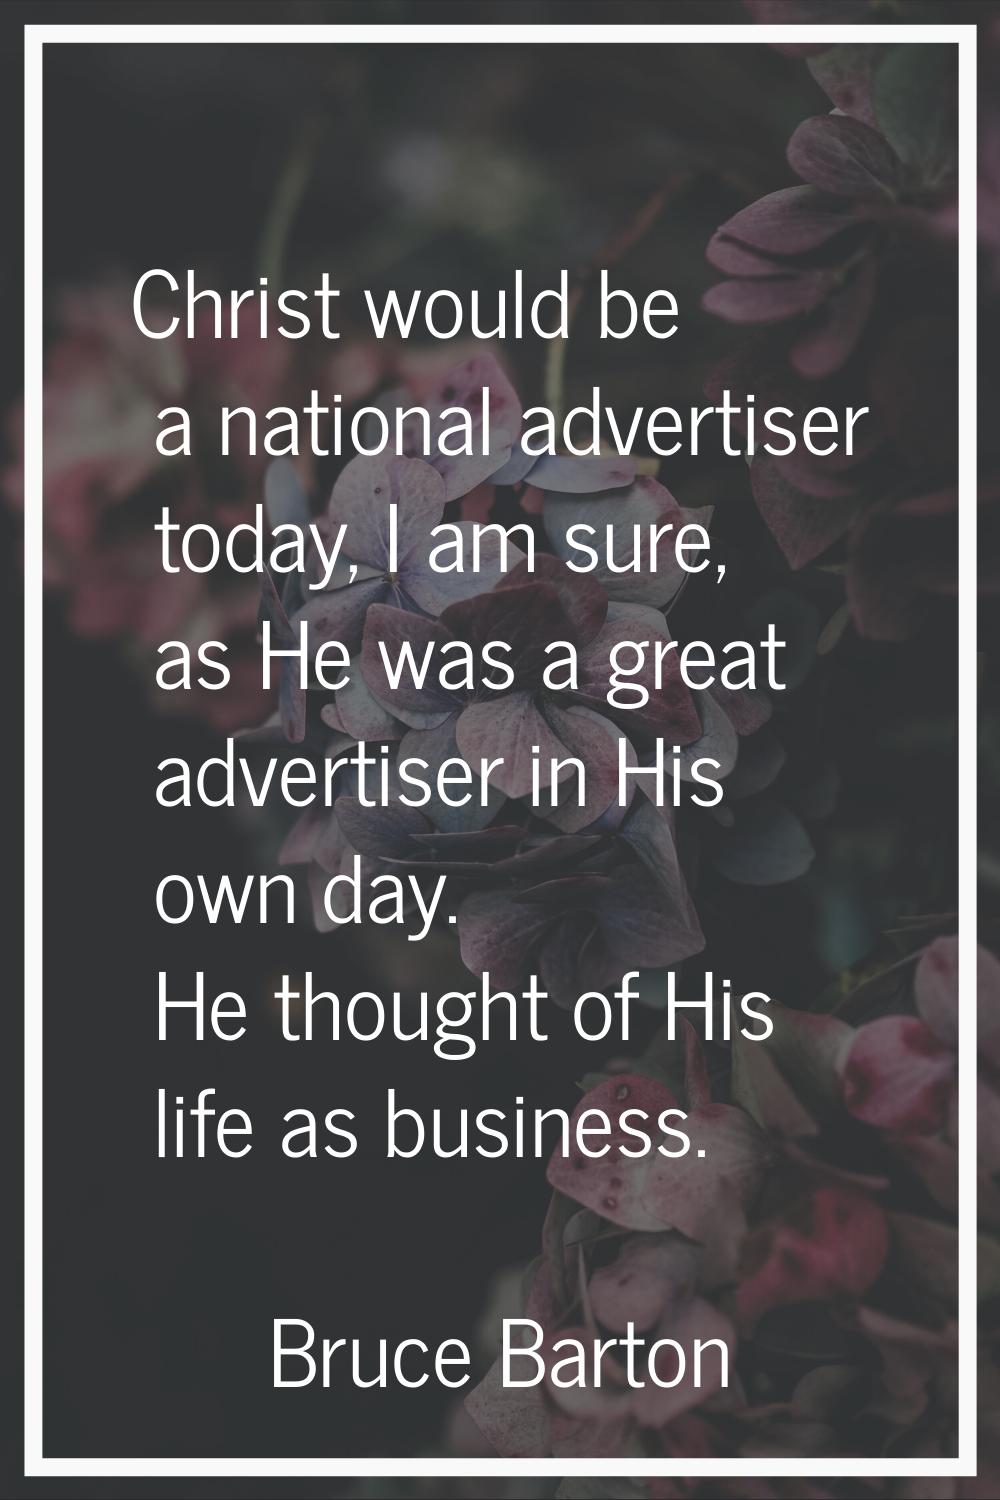 Christ would be a national advertiser today, I am sure, as He was a great advertiser in His own day